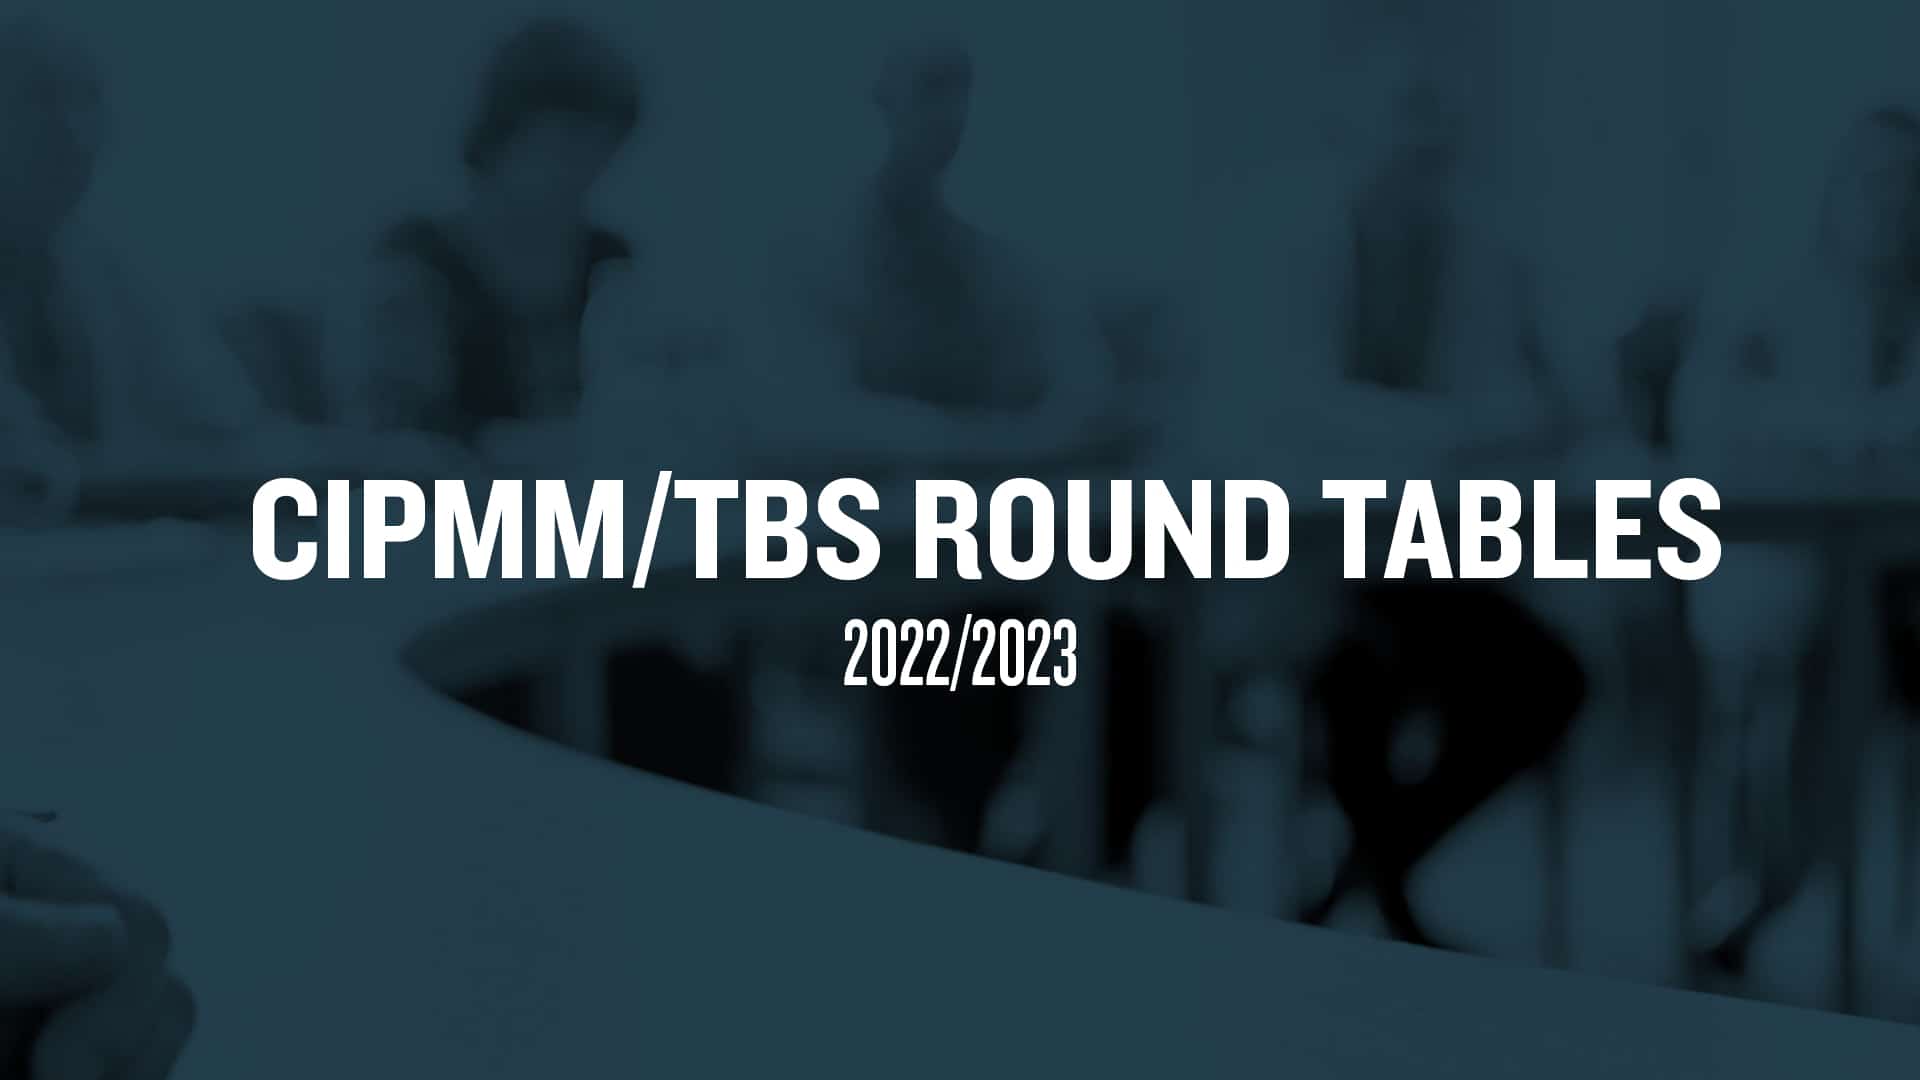 CIPMM/TBS Round Tables